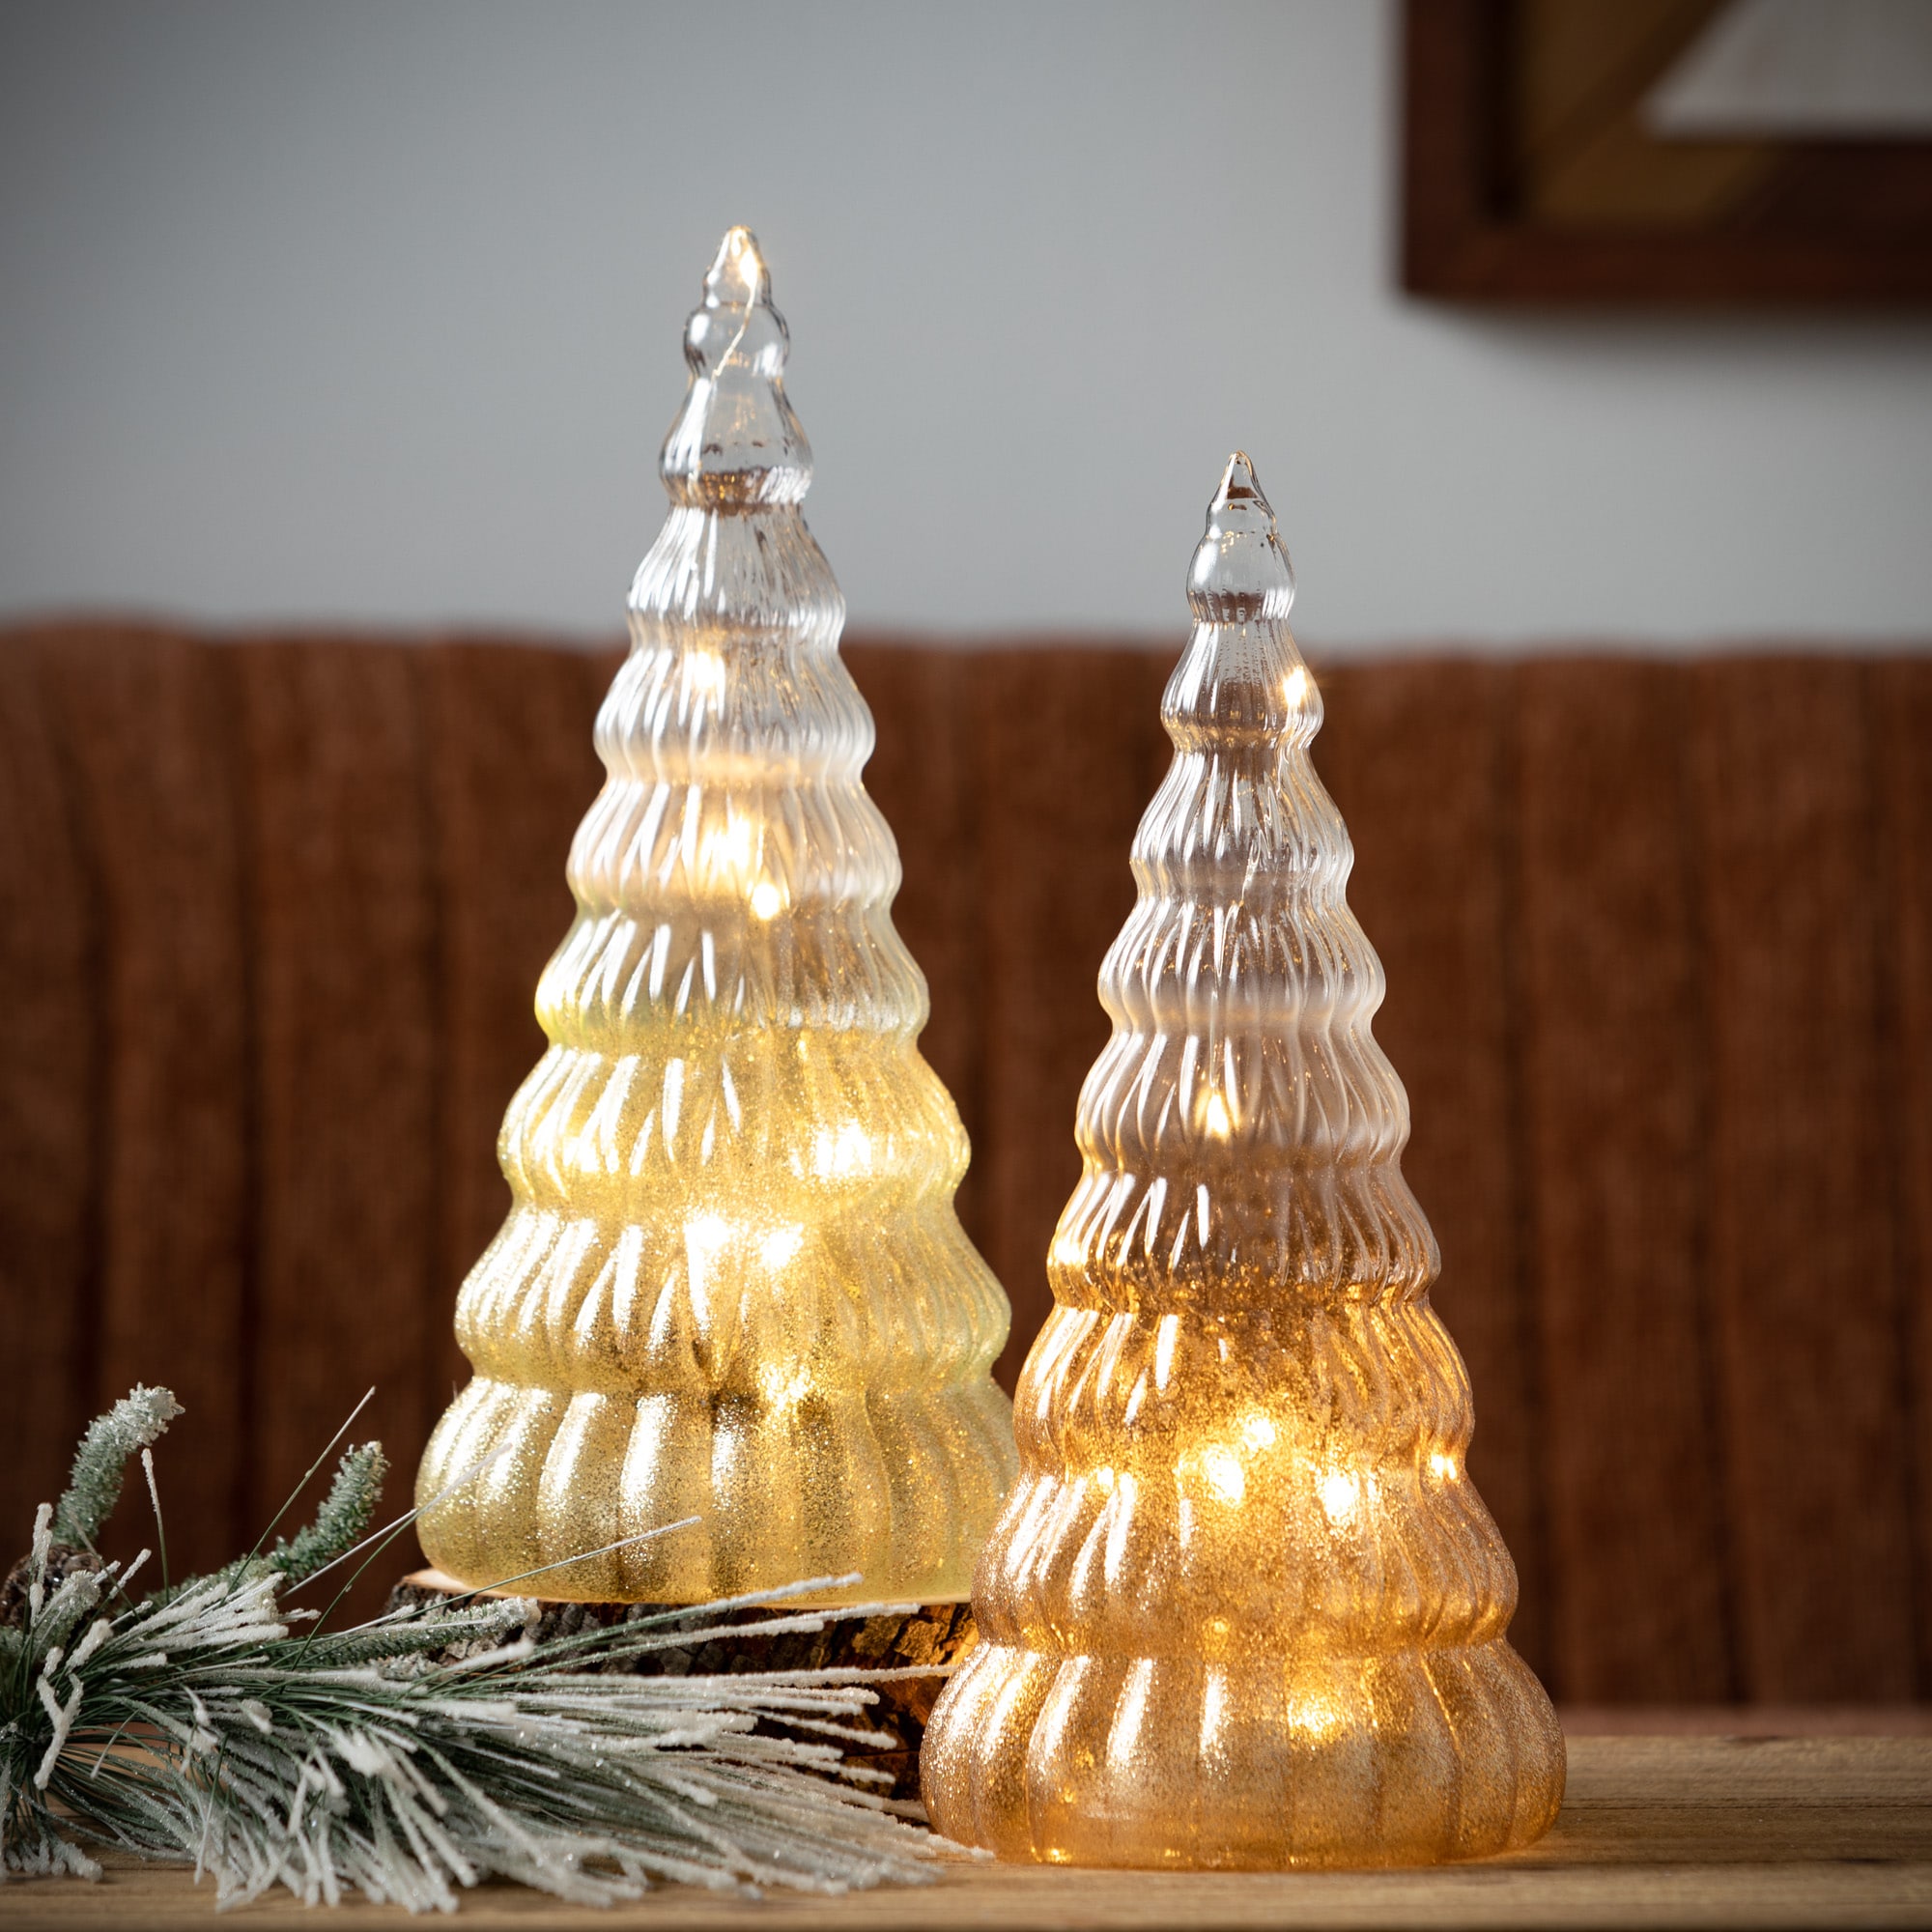 Sullivans 12.5-in Lighted Decoration Christmas Tree(s) (2-Pack) Battery ...